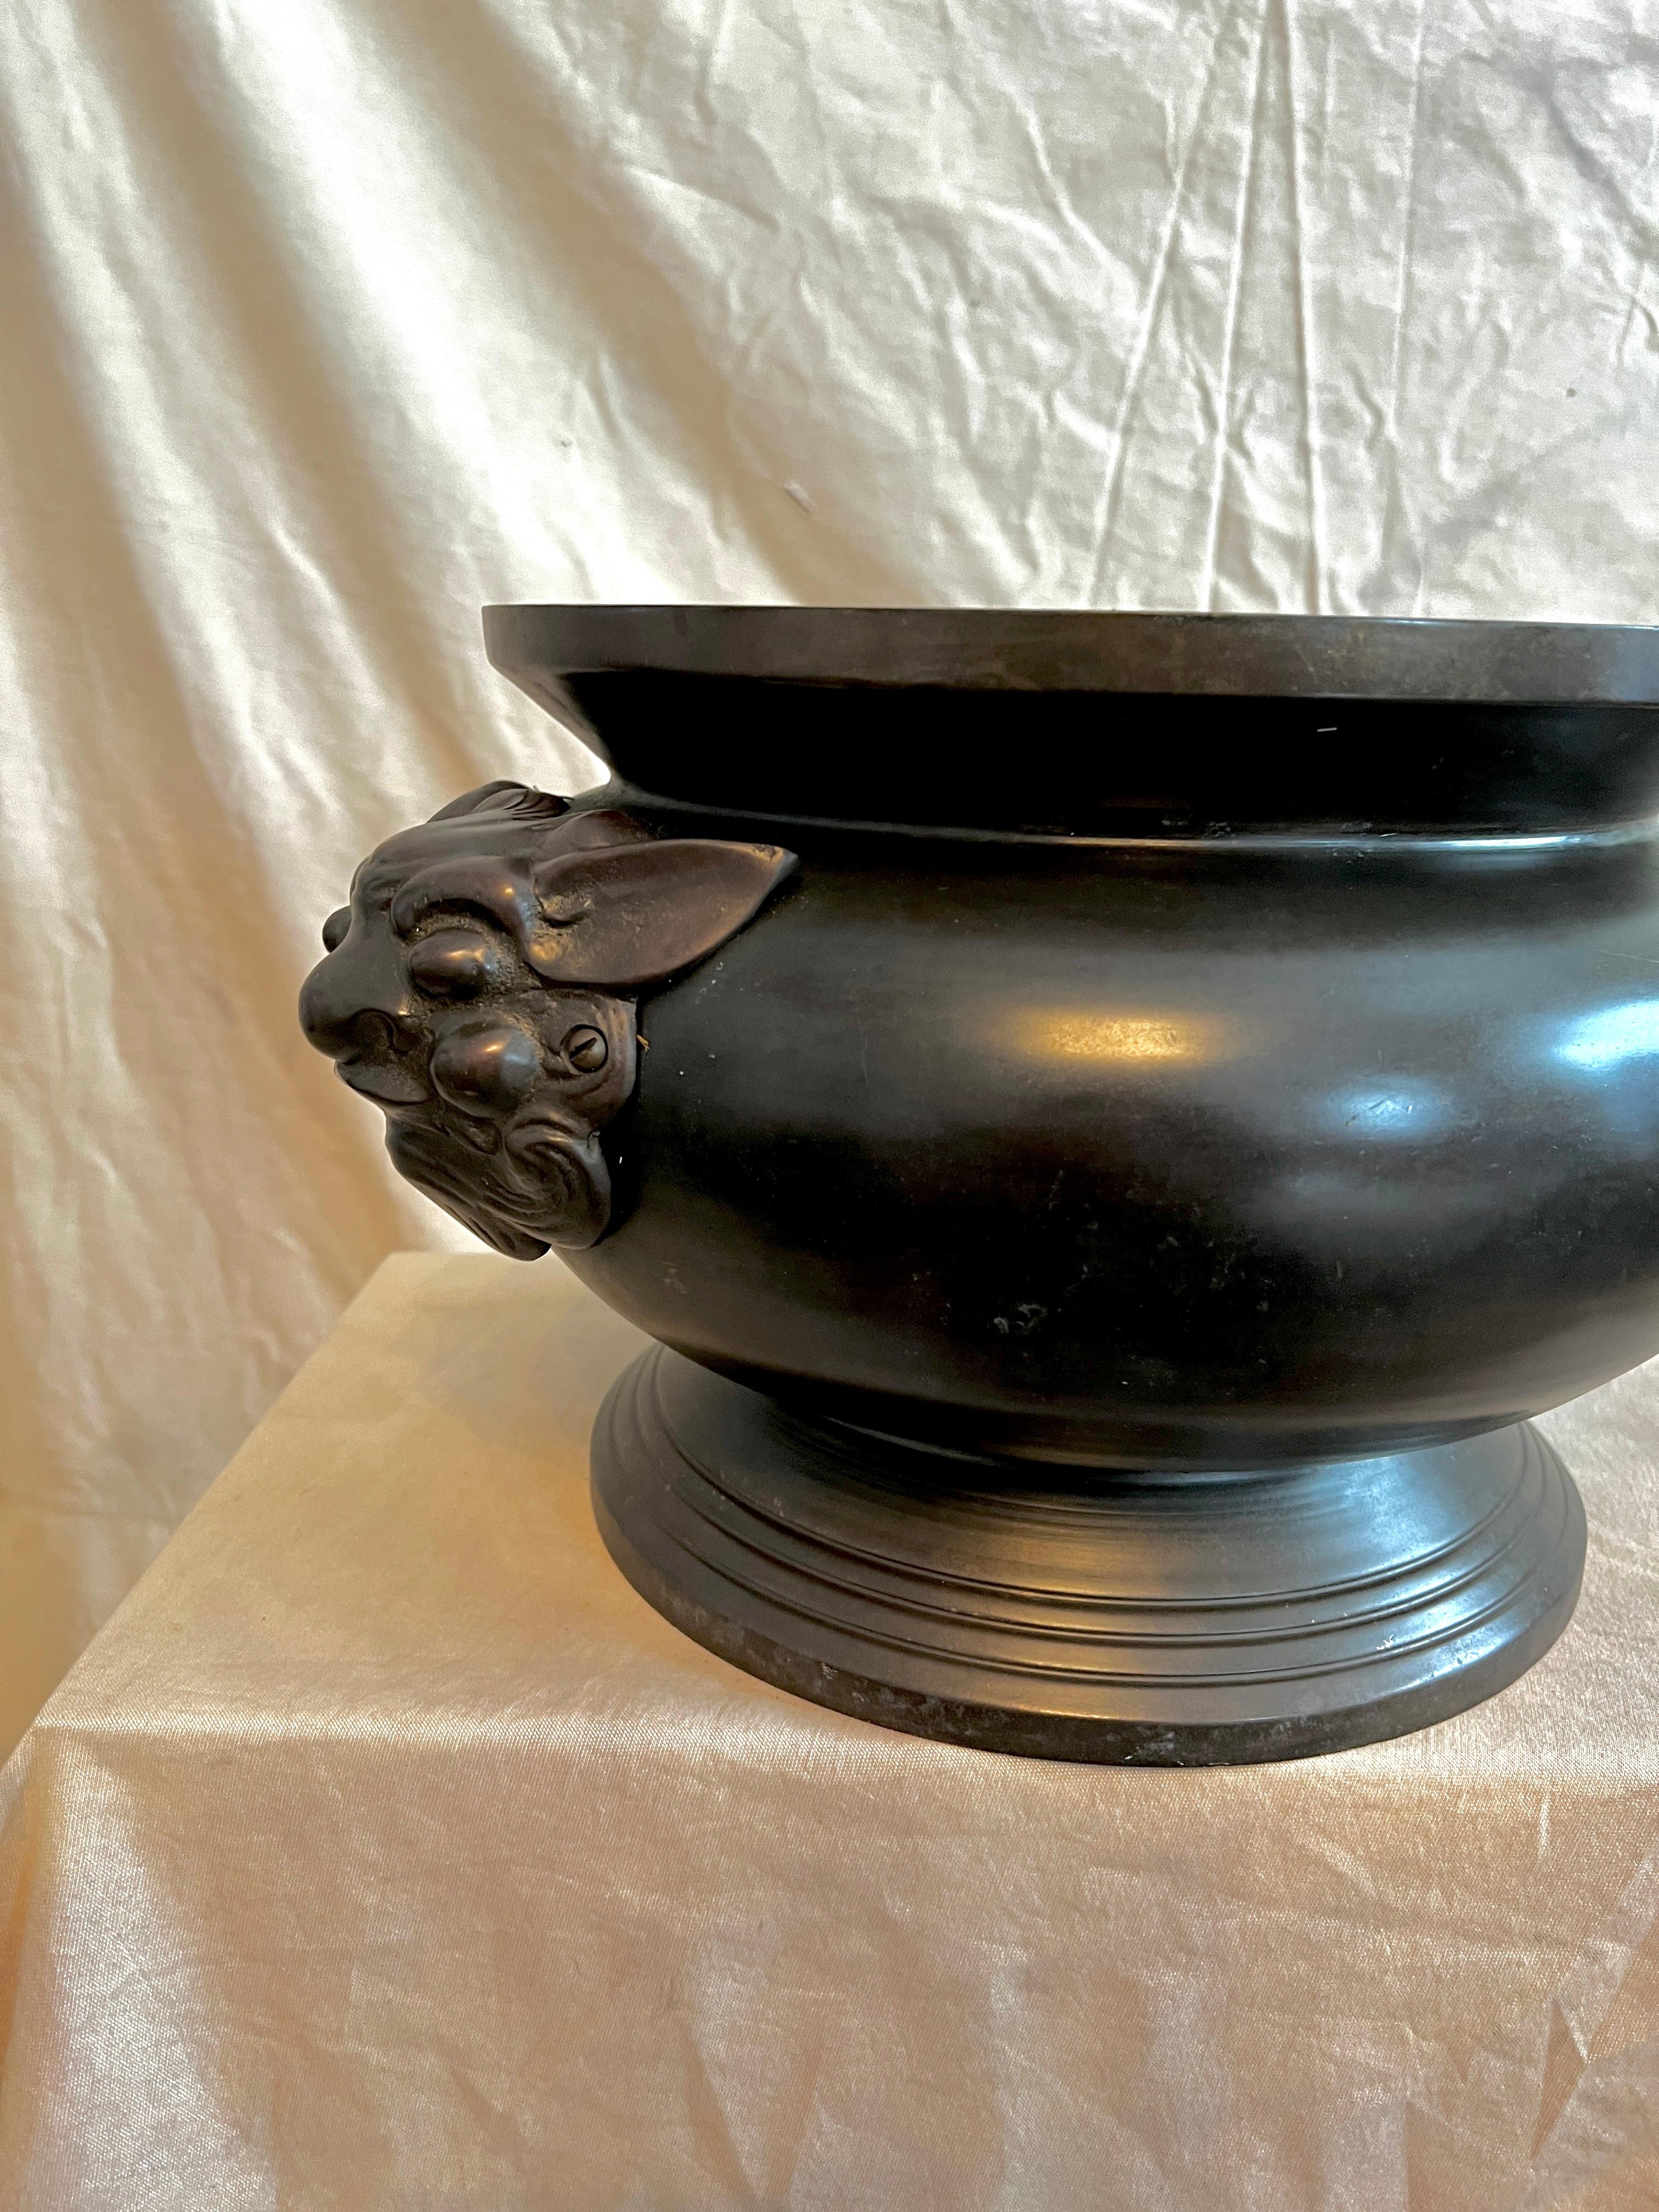 Beautifully Hand Crafted Bronze Cachepot or Jardiniere planter with Foo Dog Handles;.

The piece could easily be a center piece (see attache photos), a planter for house or garden plants and a Jardiniere, possibly housing a small citrus tree for